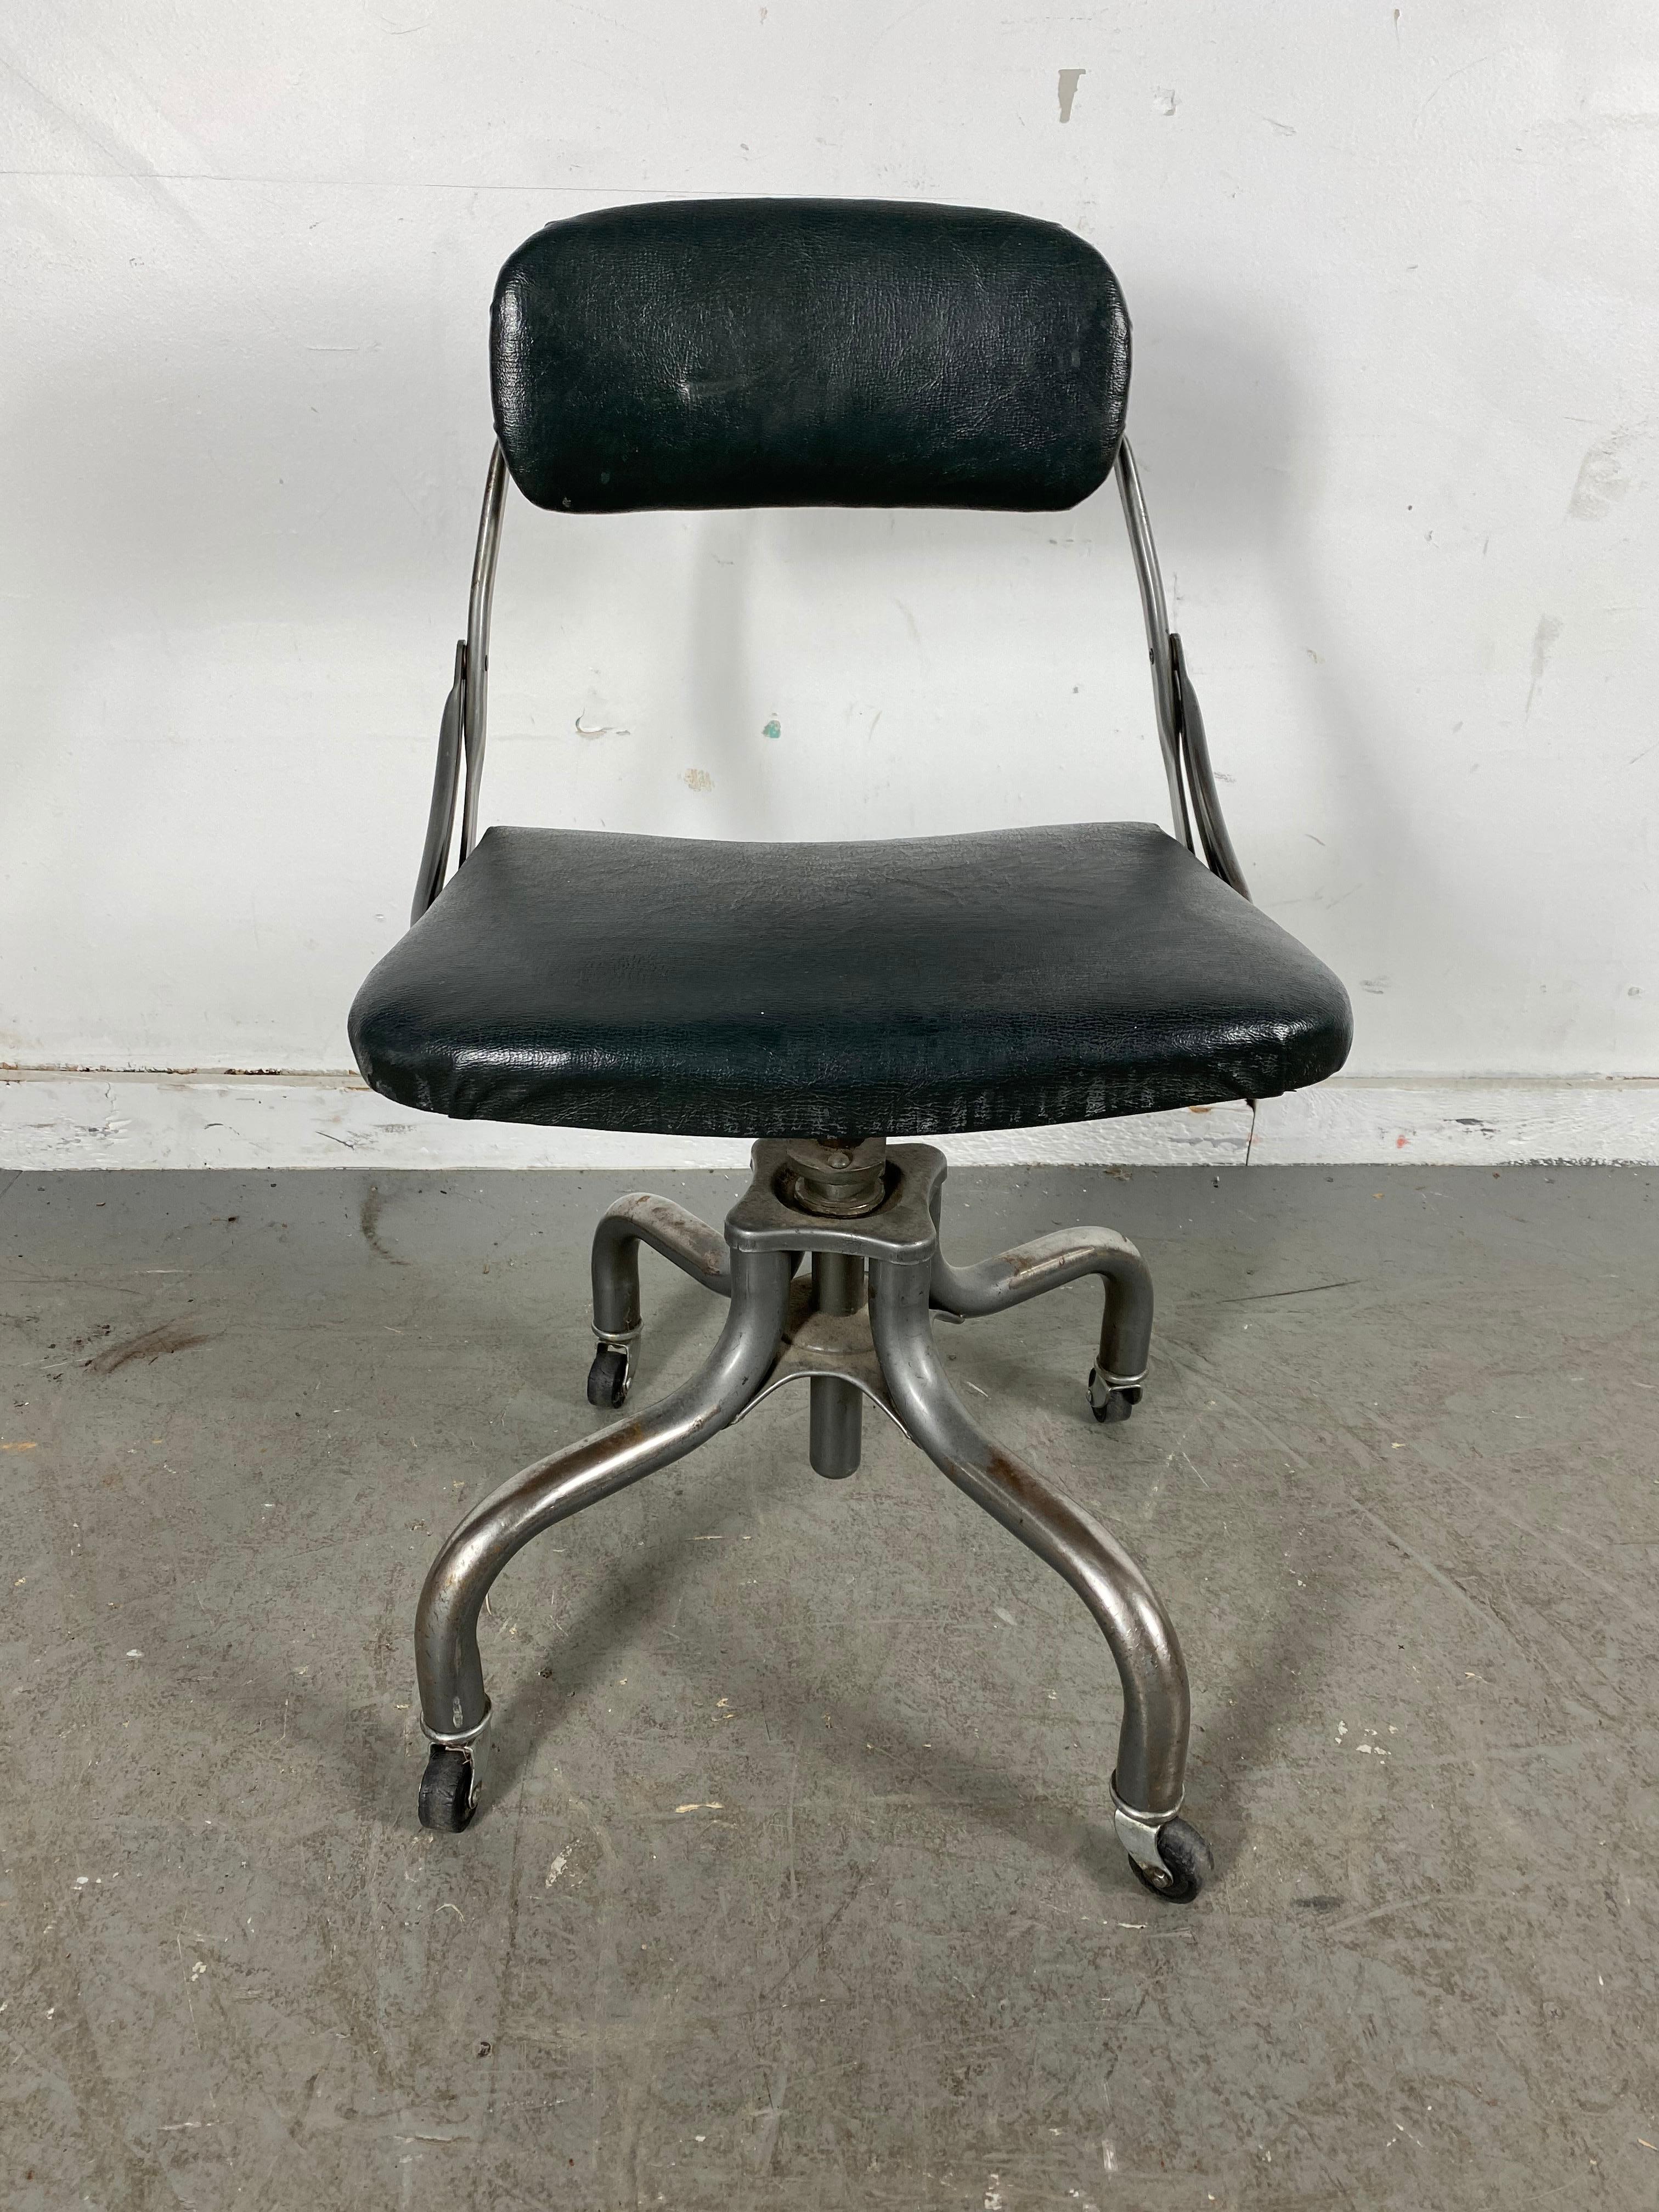 1930s Industrial swivel task / desk chair manufactured by Do/ More, Art Deco, amazing, unmolested, all original condition, retains original 